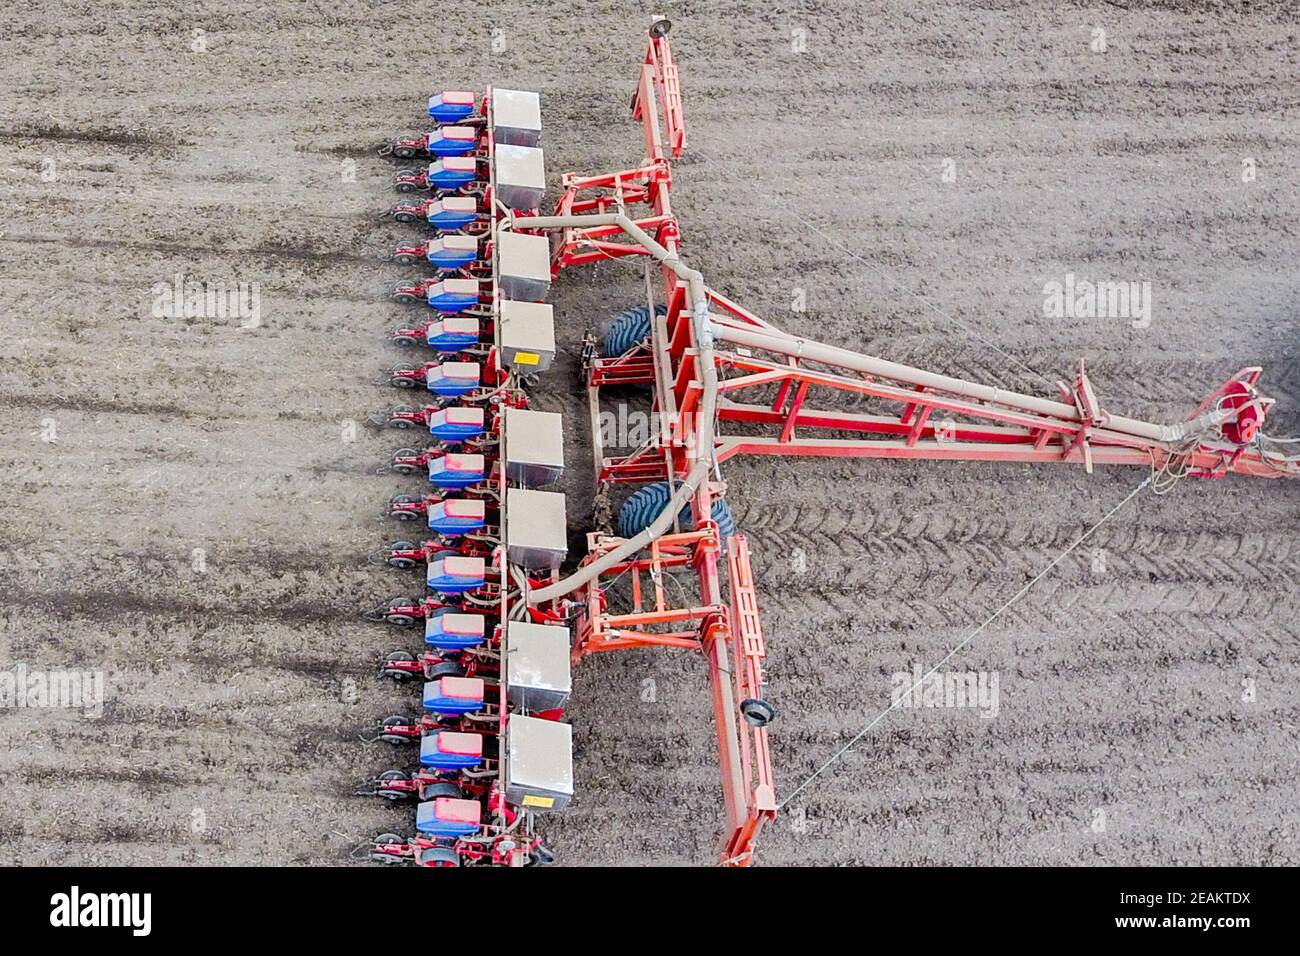 Grain sowing machine with attachments Stock Photo by ©alho007